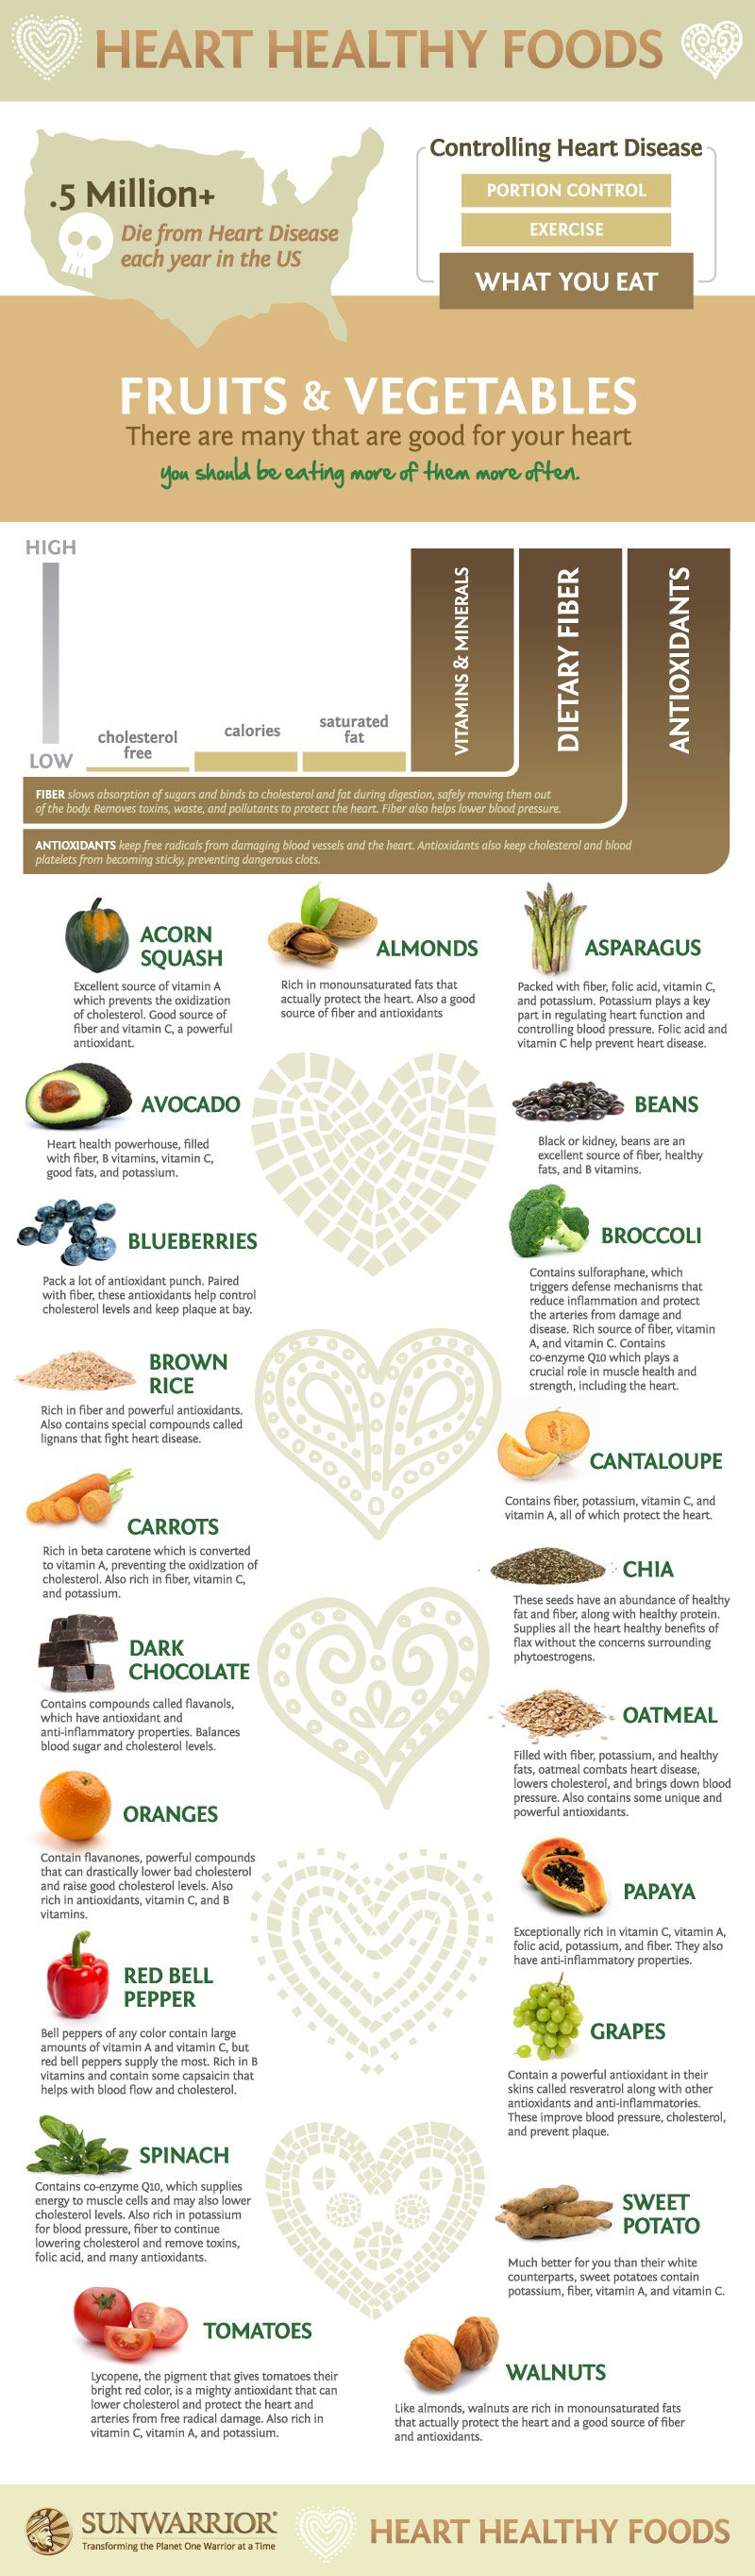 Heart-Healthy-Foods-Infographic